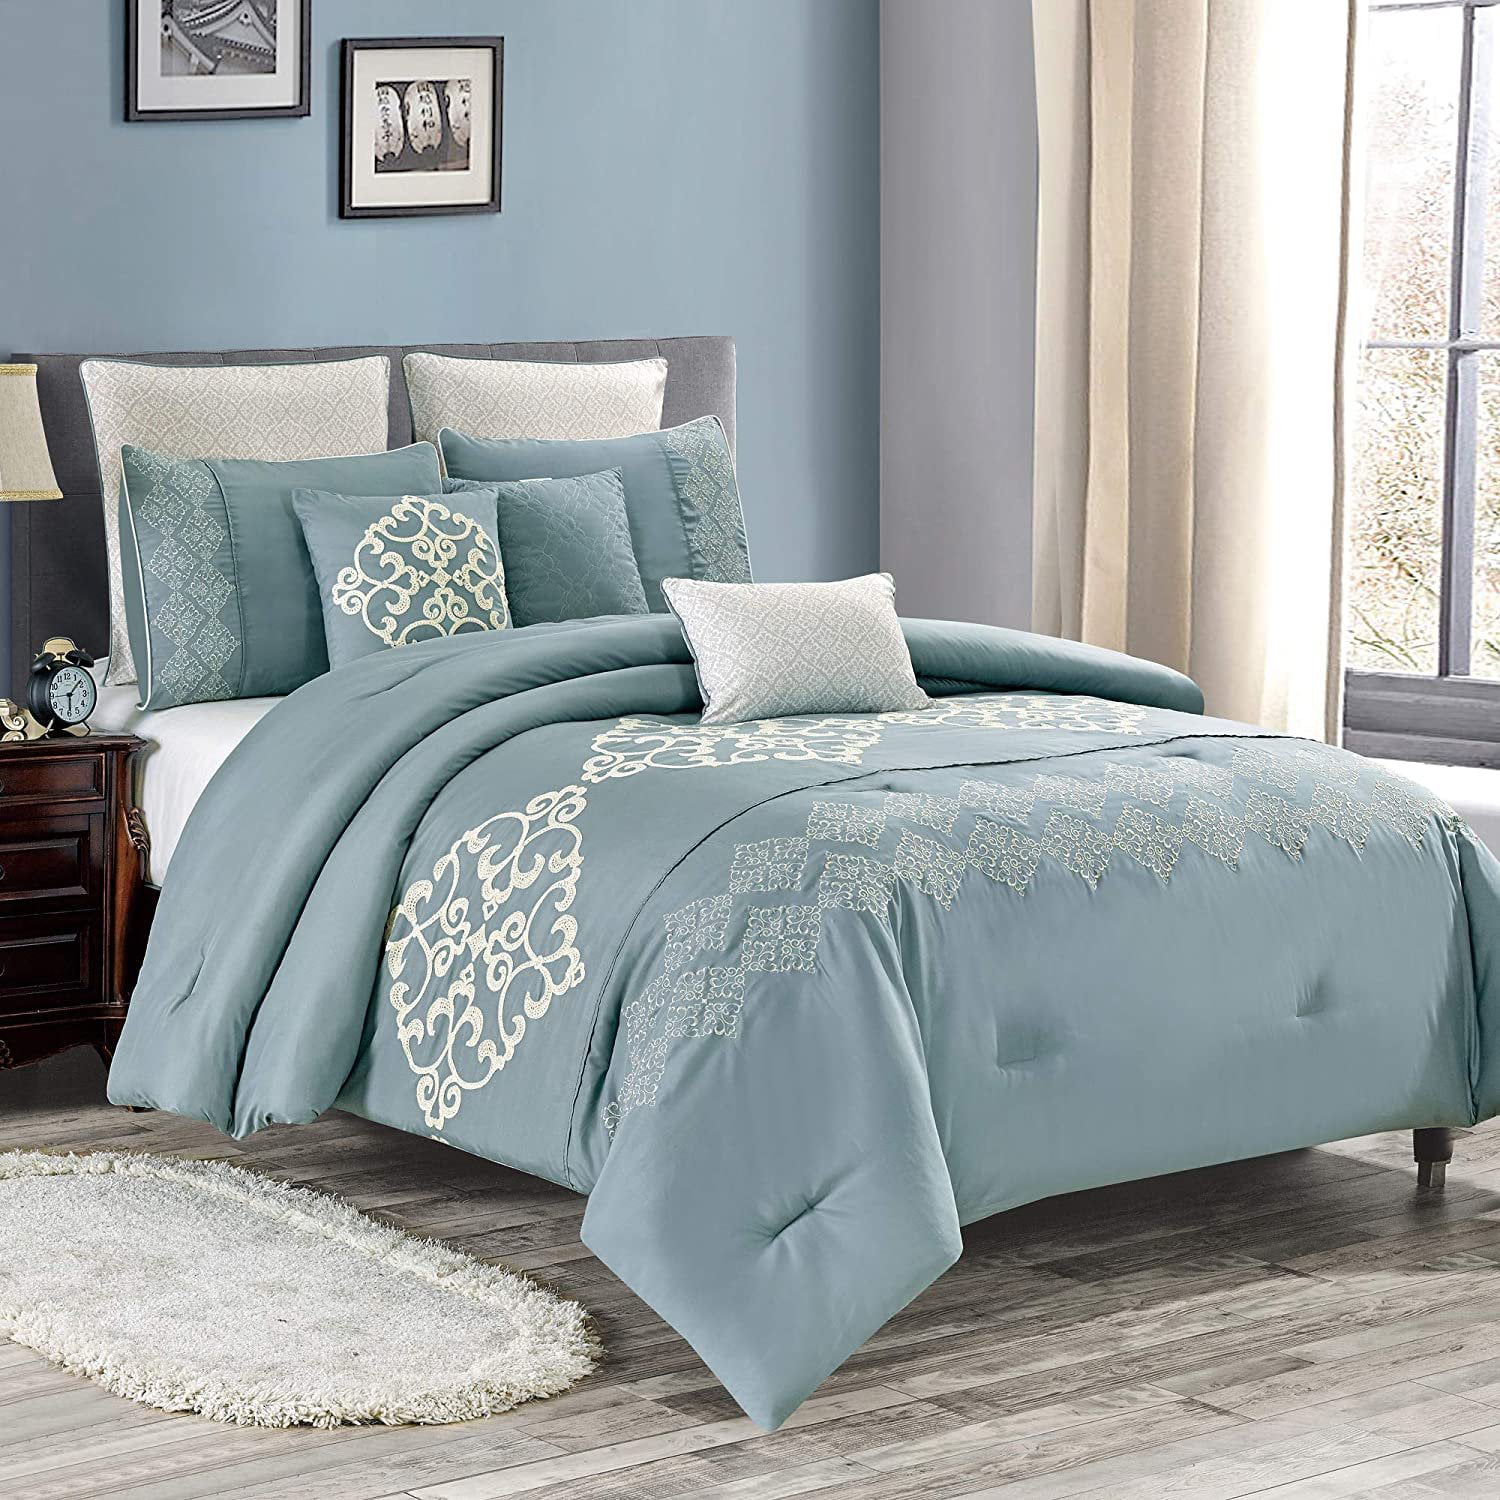 Sapphire Home Luxury 8 Piece Full Queen Comforter Set With Shams And